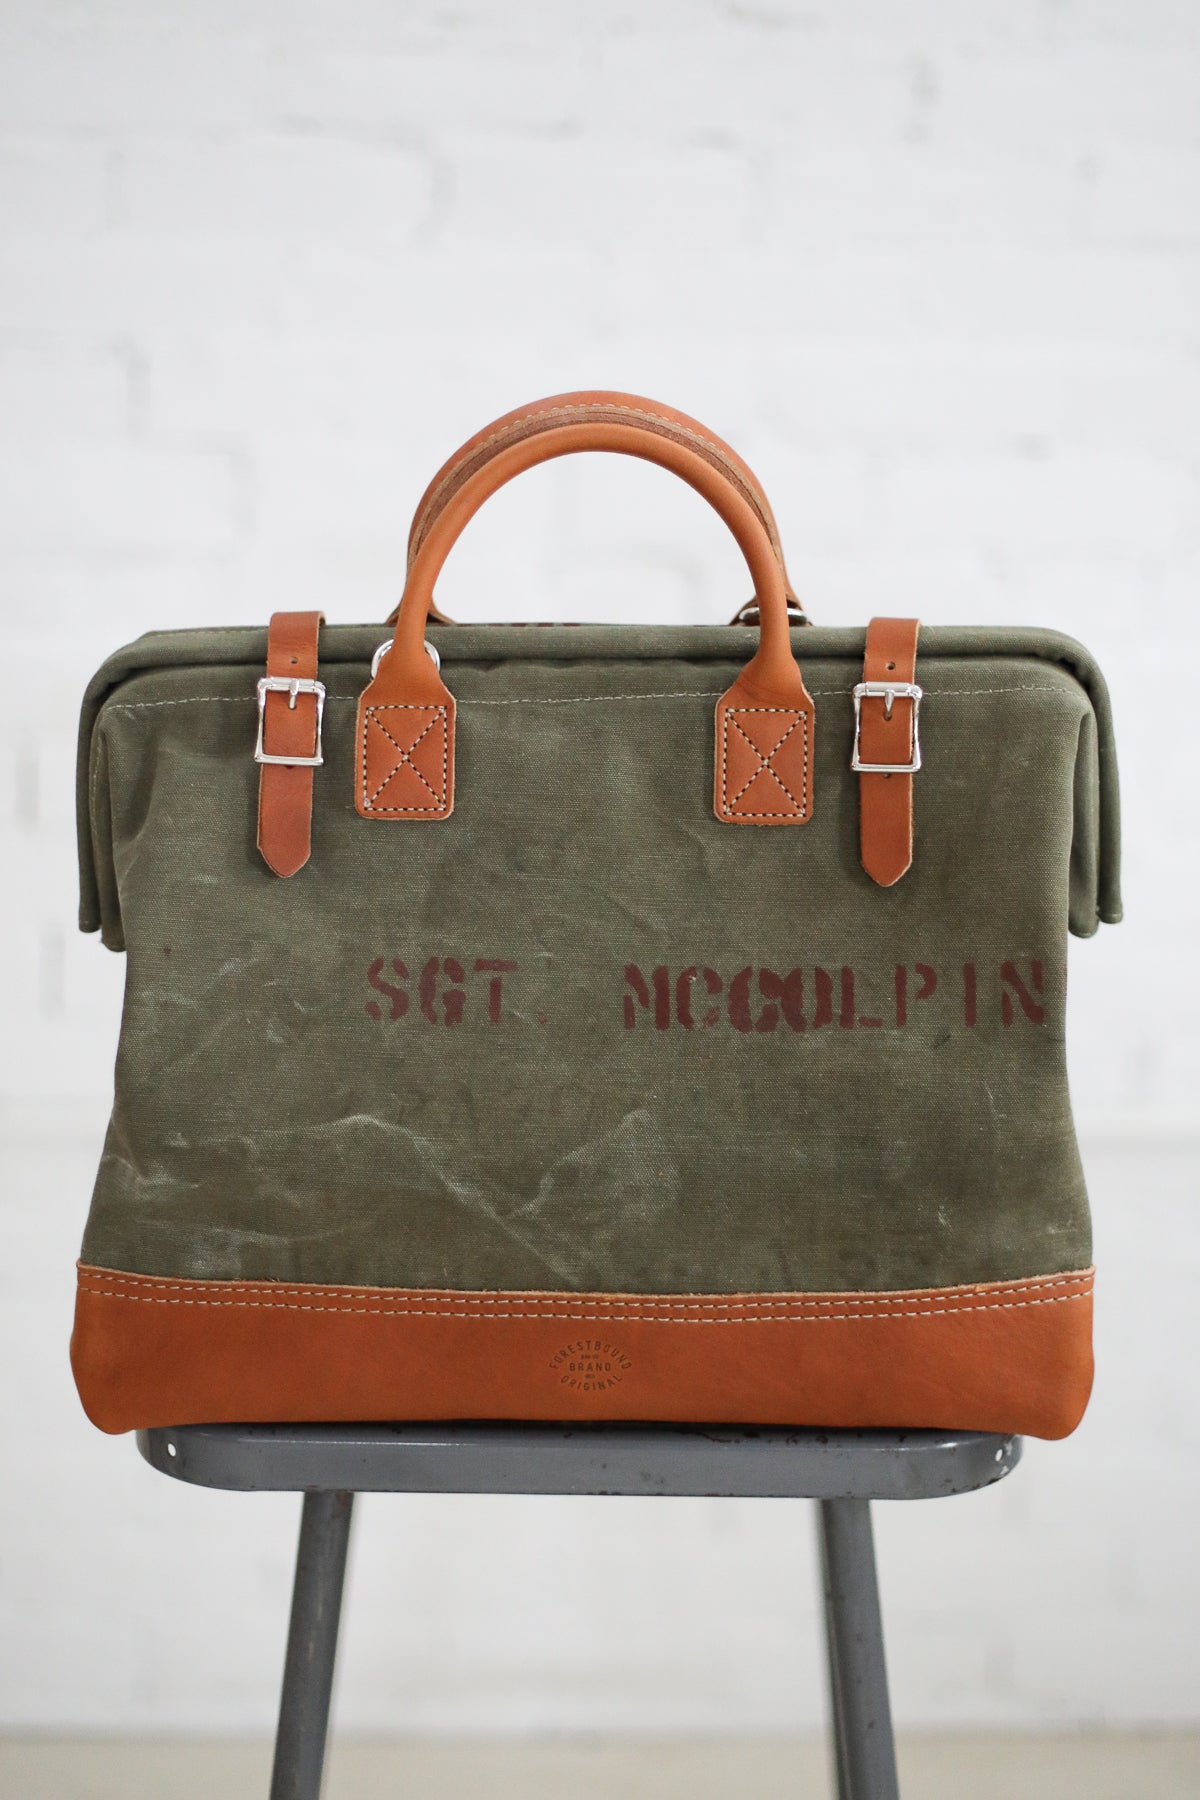 WWII era Salvaged Military Canvas Duffle Bag